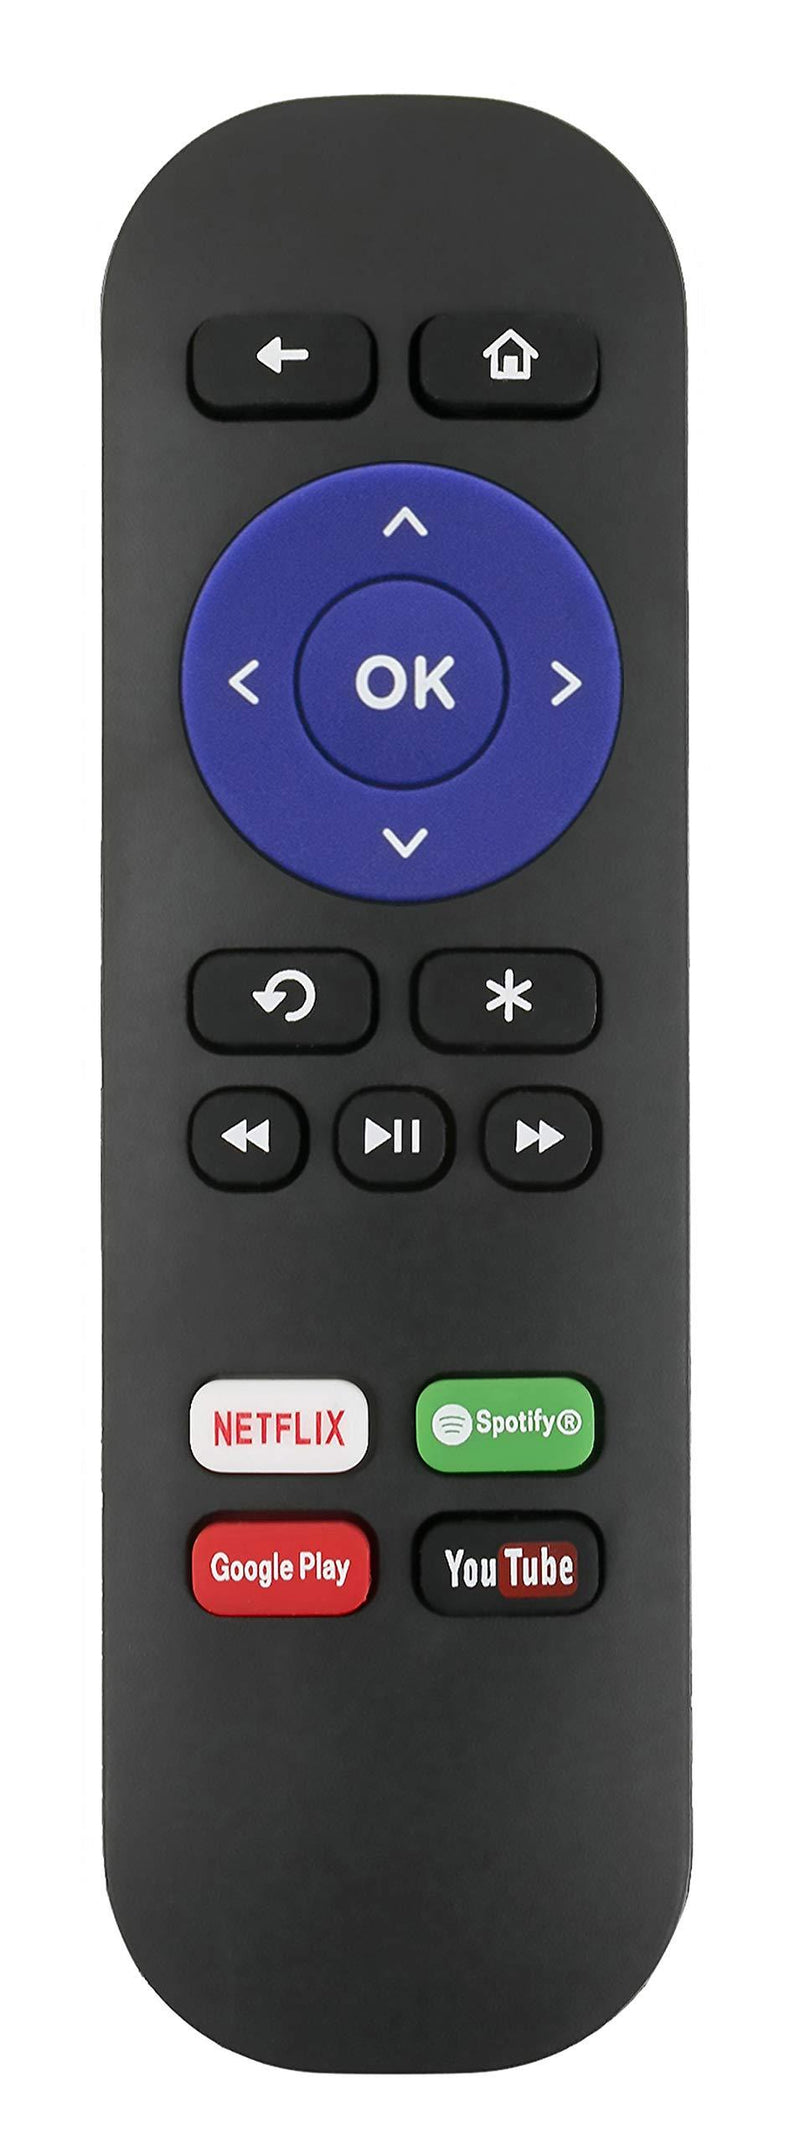 New Replaced Infrared Remote Control fit for ROKU 1 2 3 4 LT HD XD XS Express Premiere 3900RW 3910RW 4620RW 3700RW 3710RW 3710XB 3900XB 4620XB 3930X 3900X, NOT Support for TCL TV or Any Other TV - LeoForward Australia